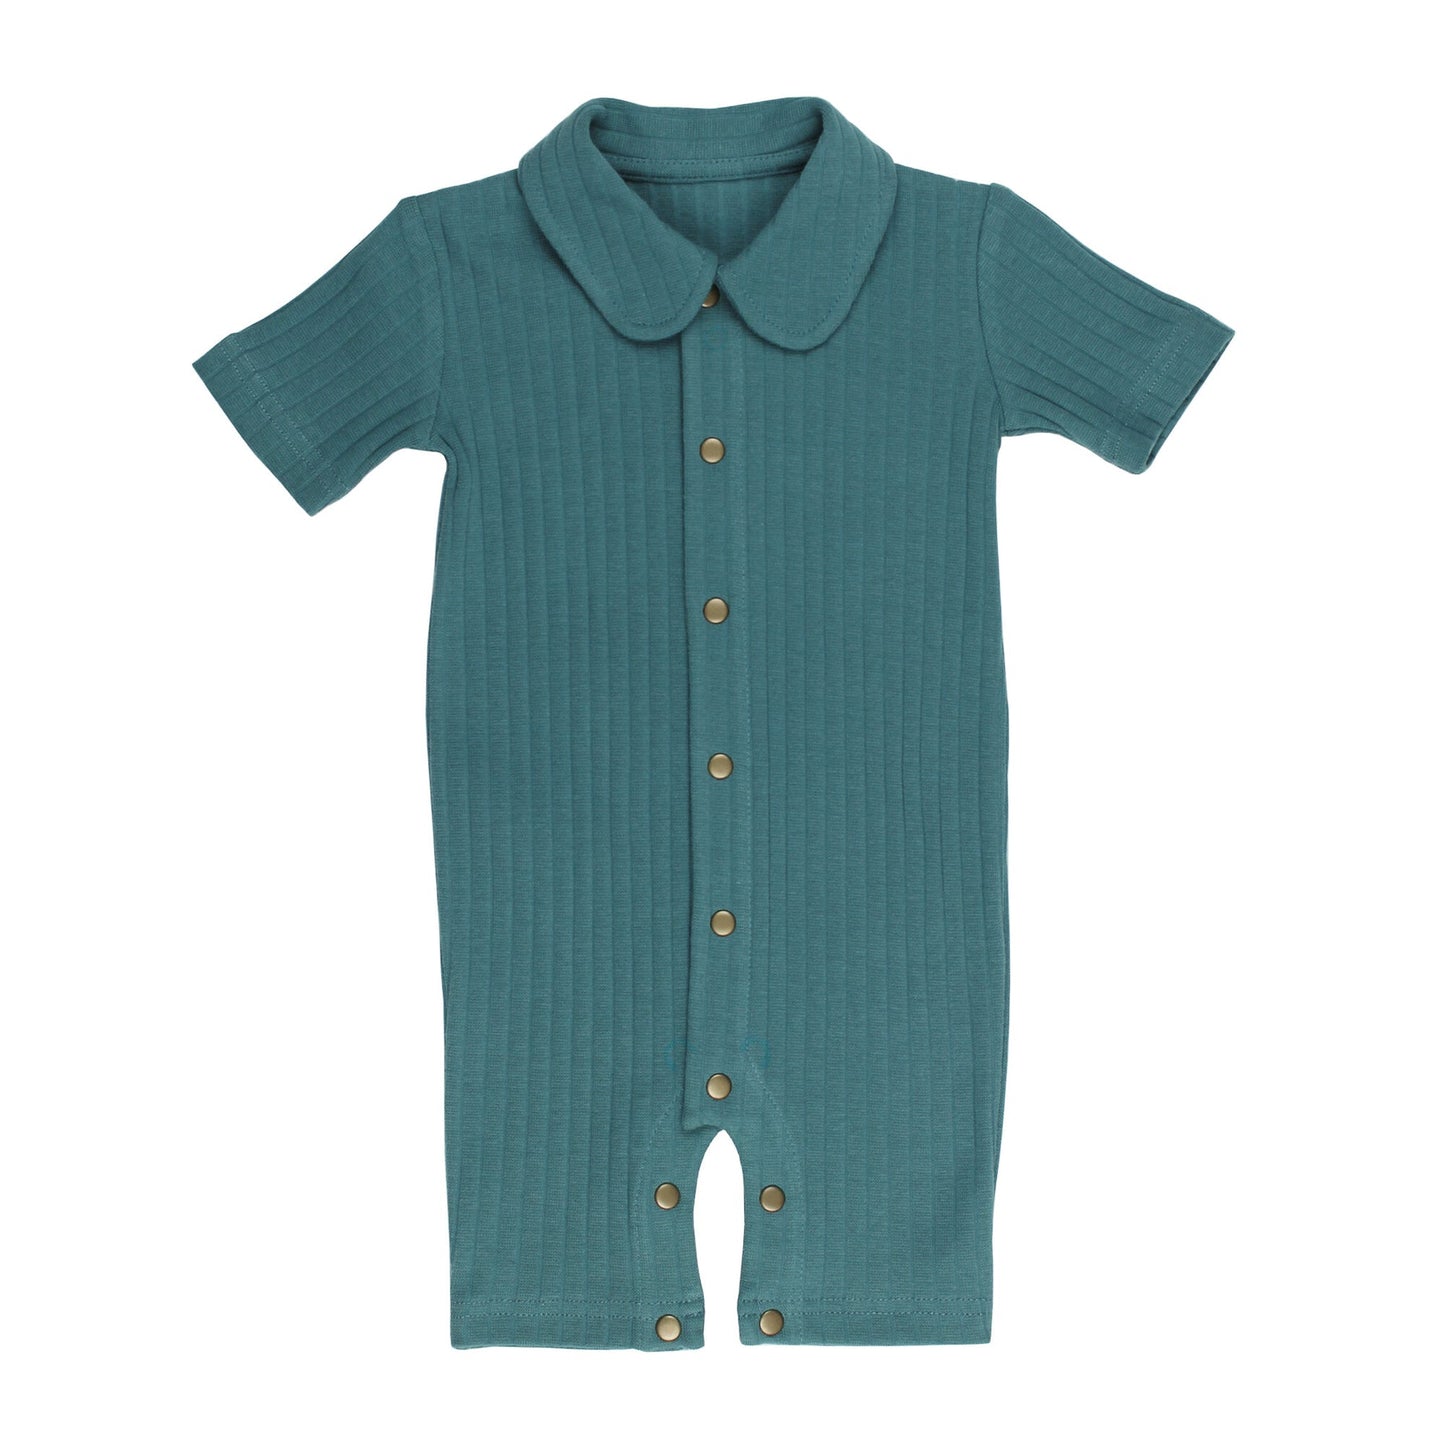 L'oved Baby 'Oasis' Ribbed Coverall Onesie